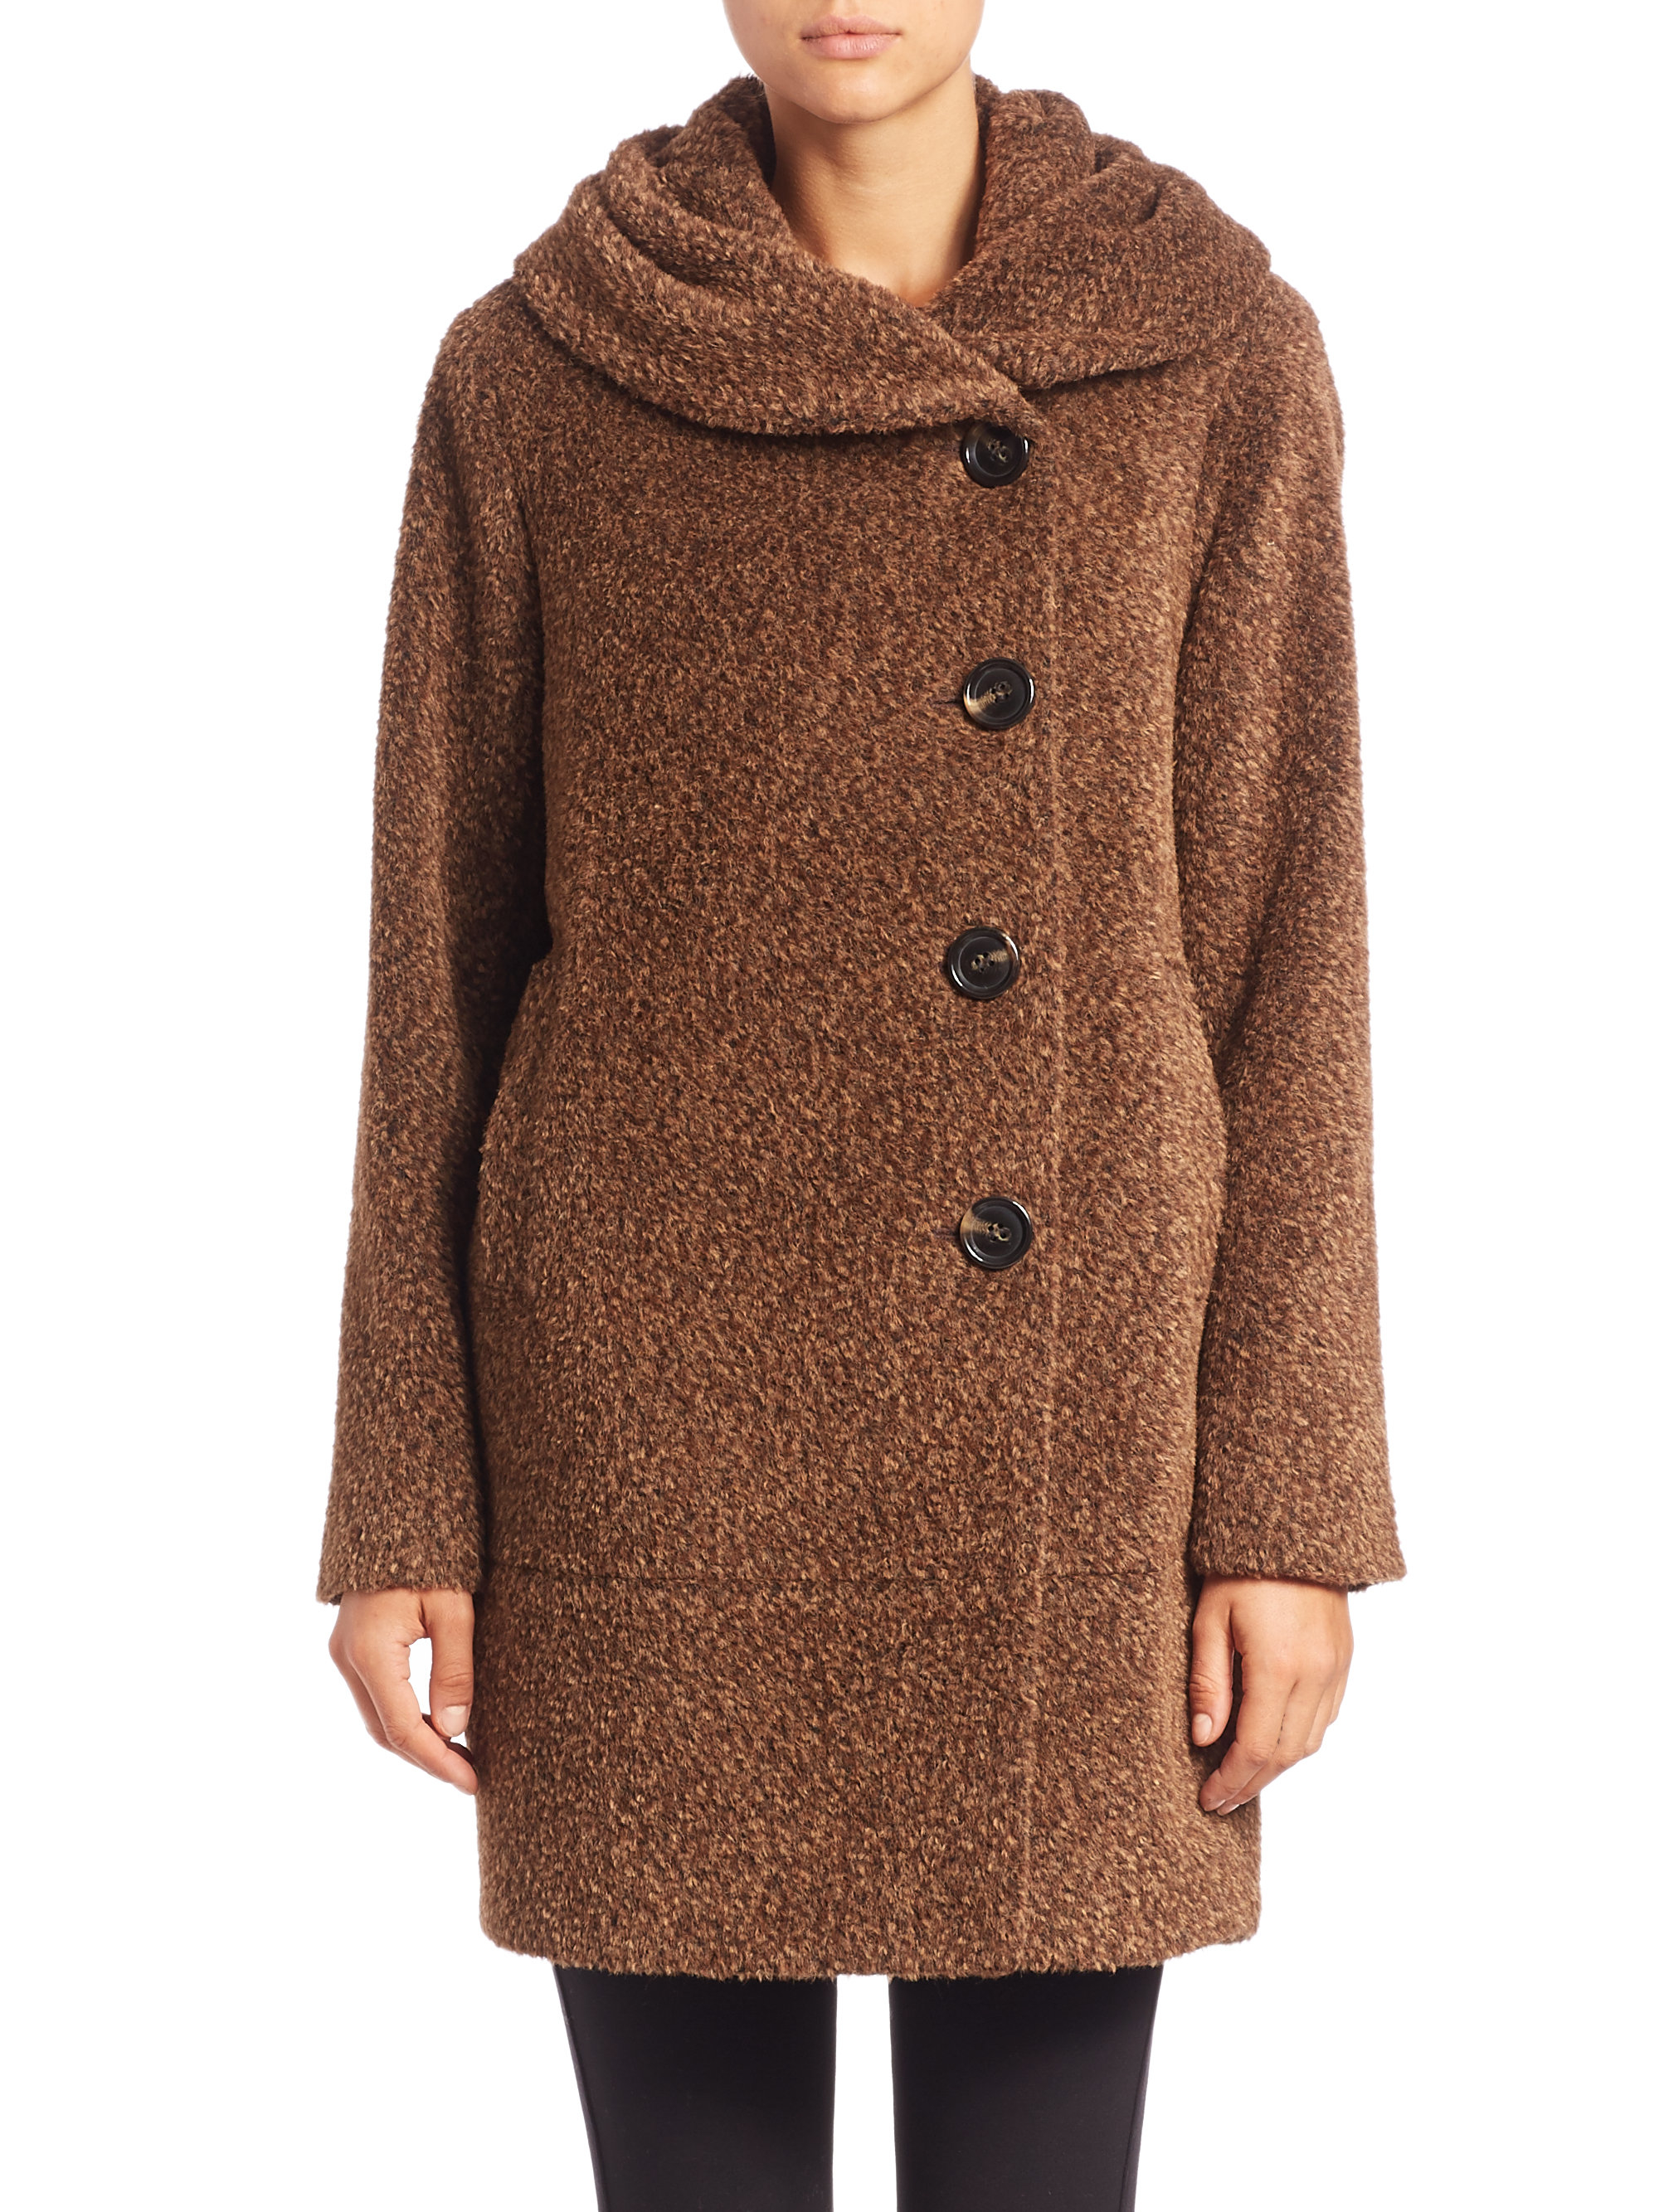 Sofia Cashmere Wool Boucle Cocoon Coat in Cocoa (Brown) - Lyst